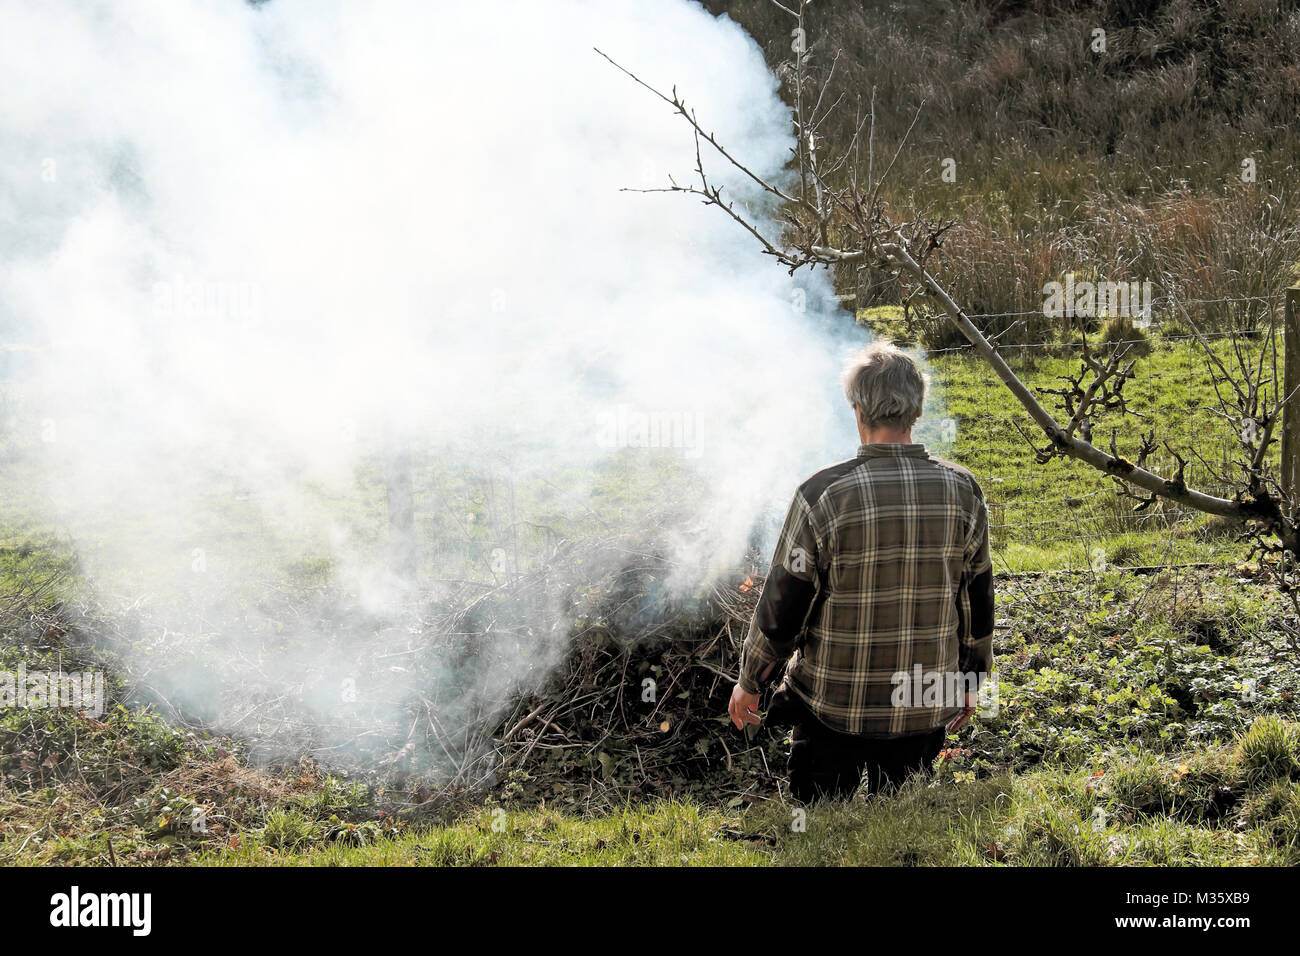 A man lighting a bonfire in the garden tidying up and burning old sticks and branches in preparation for spring February in Wales UK  KATHY DEWITT Stock Photo